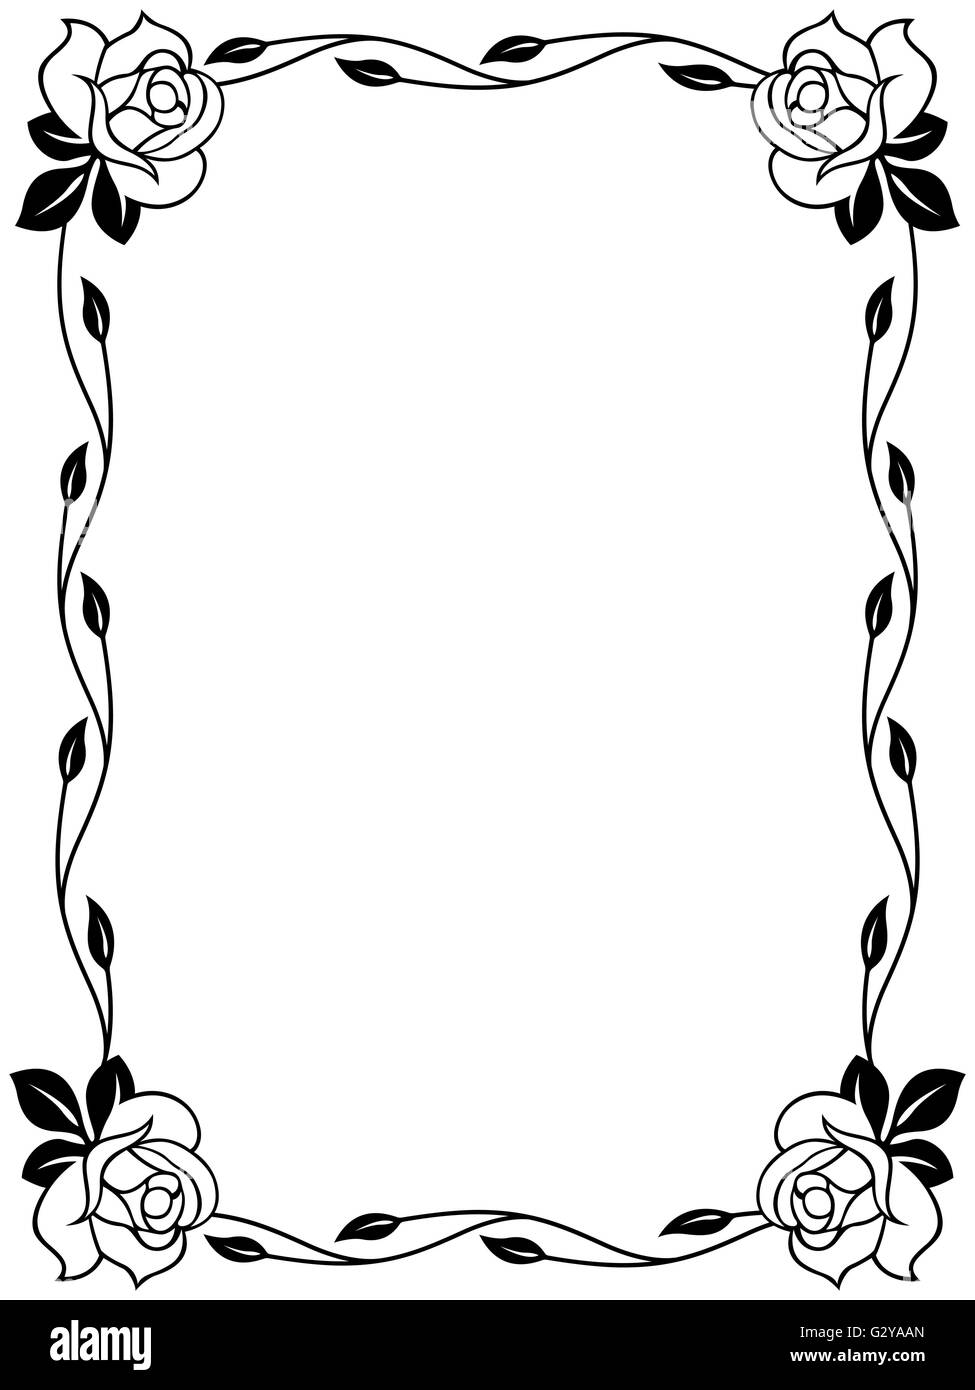 Floral ornamental frame with roses, black and white vector illustration Stock Vector